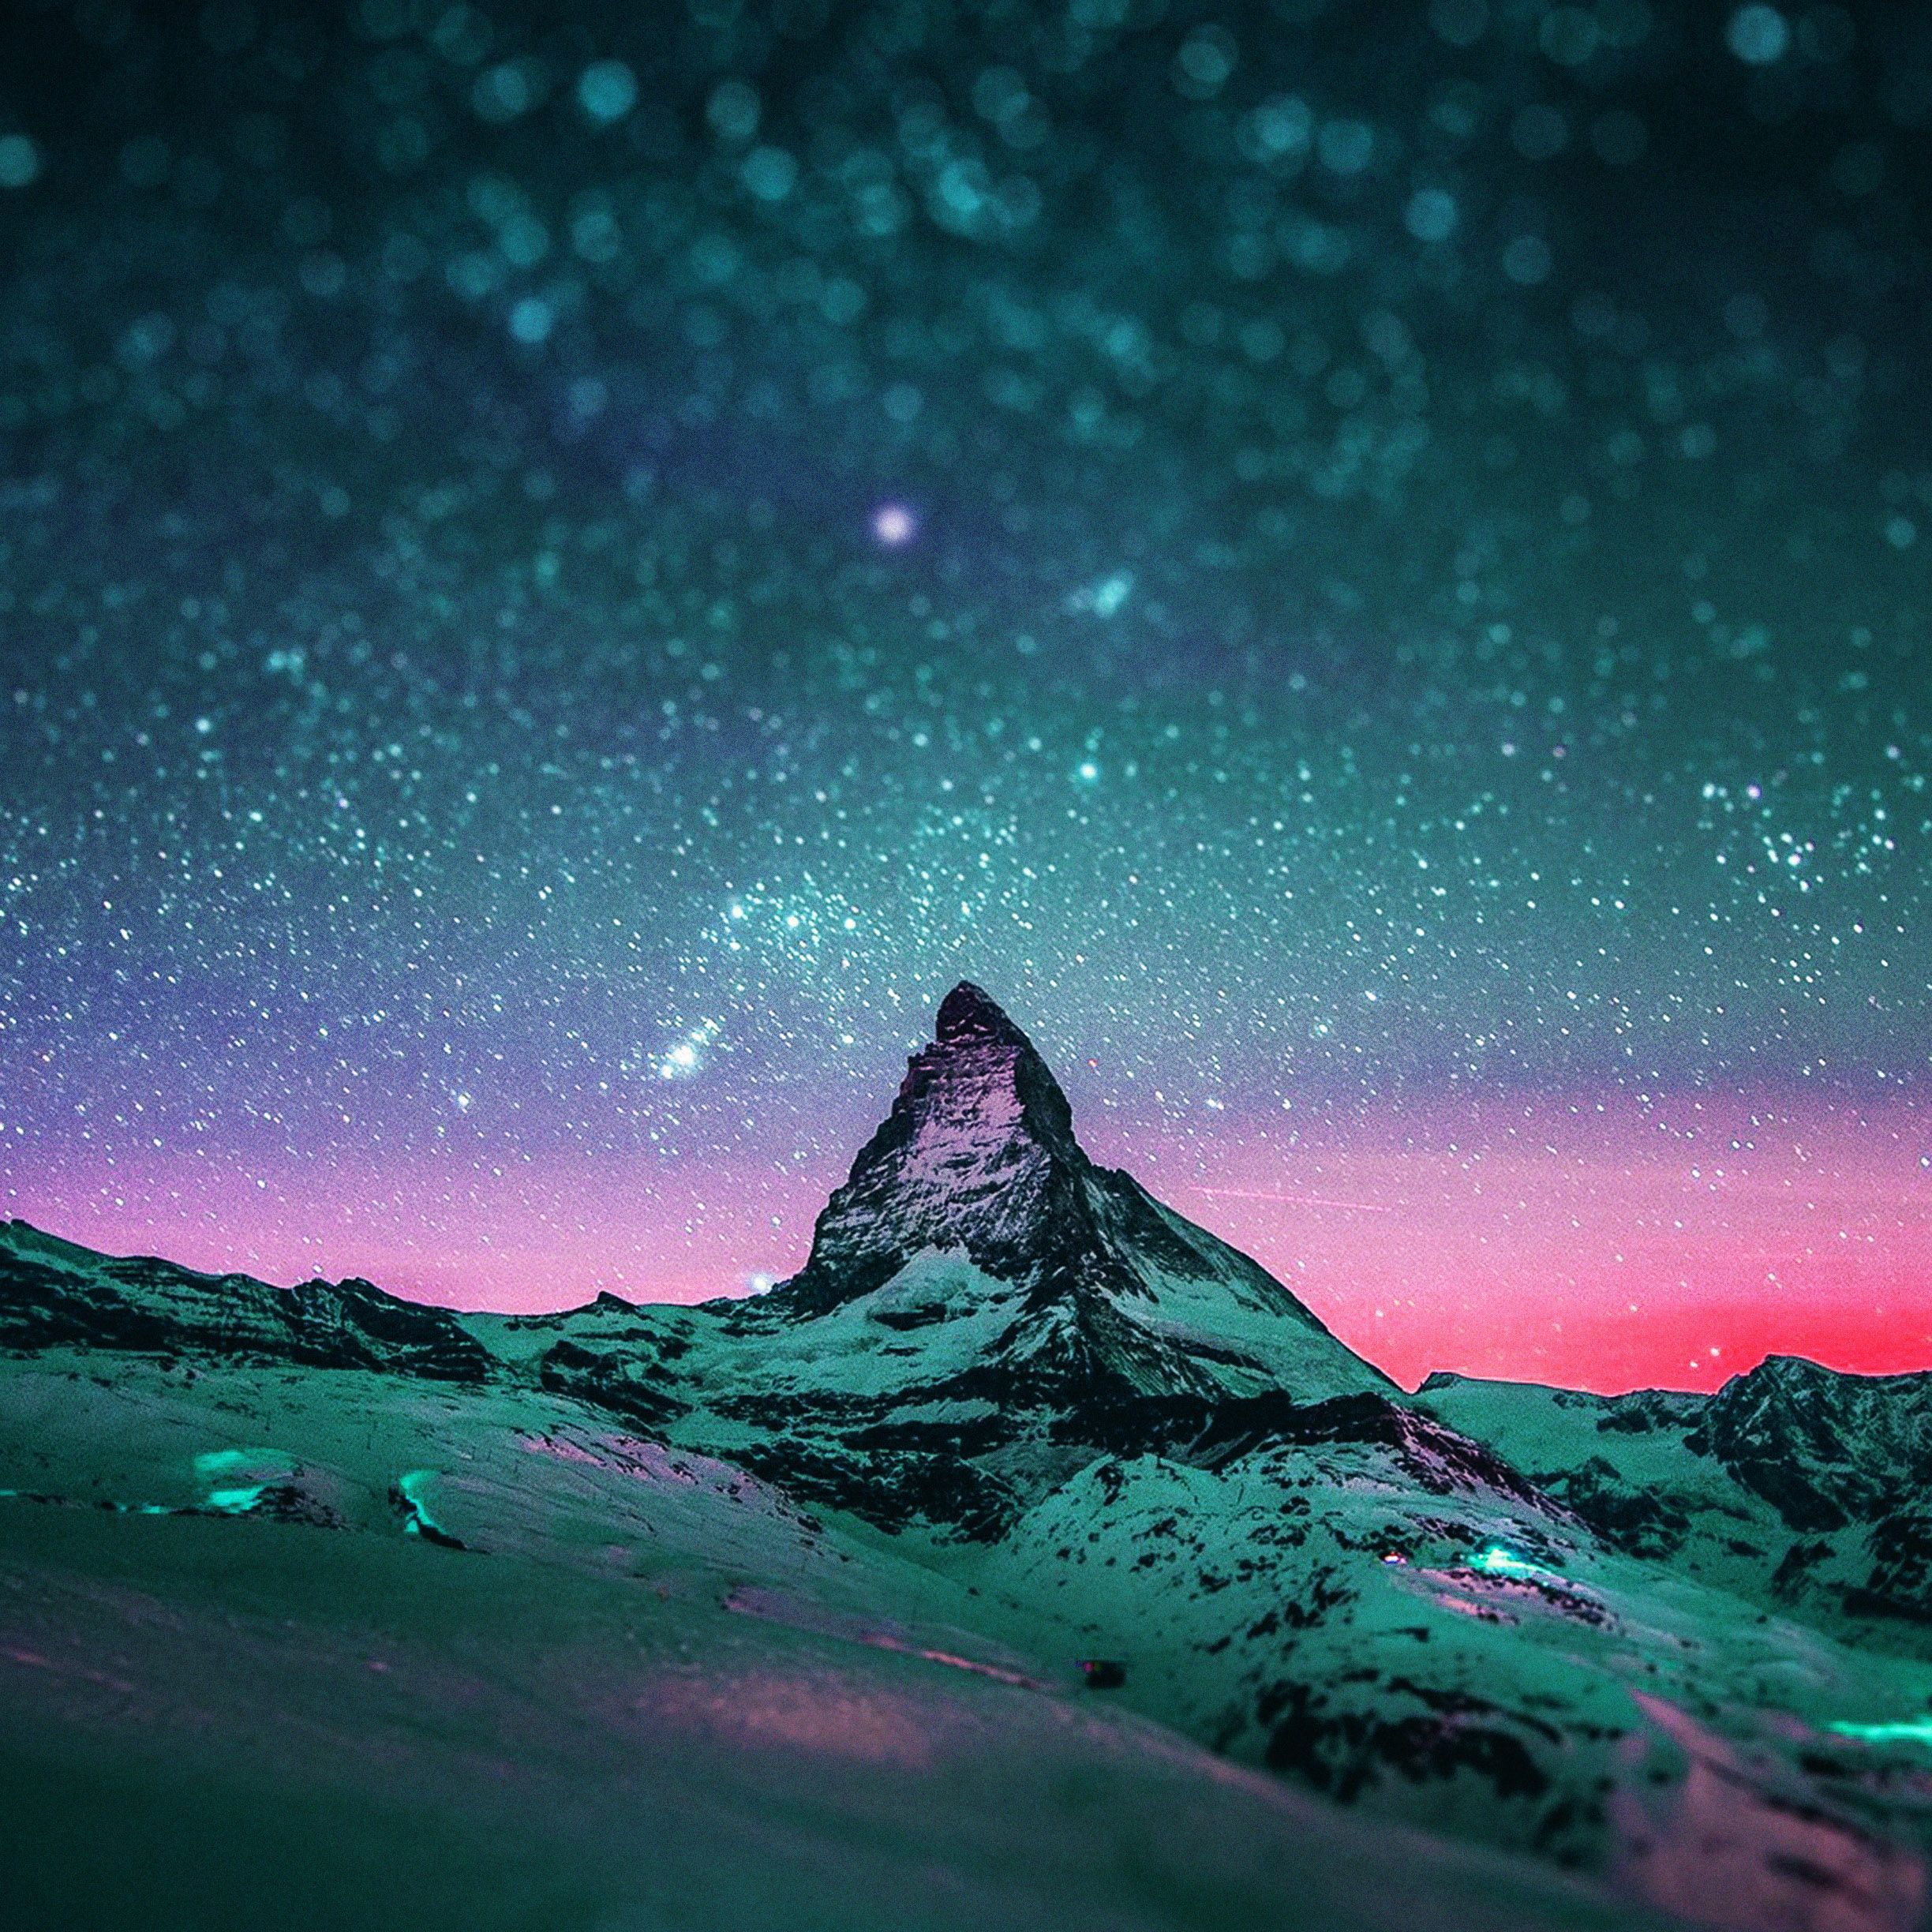 Wallpapers of the week starred night sky